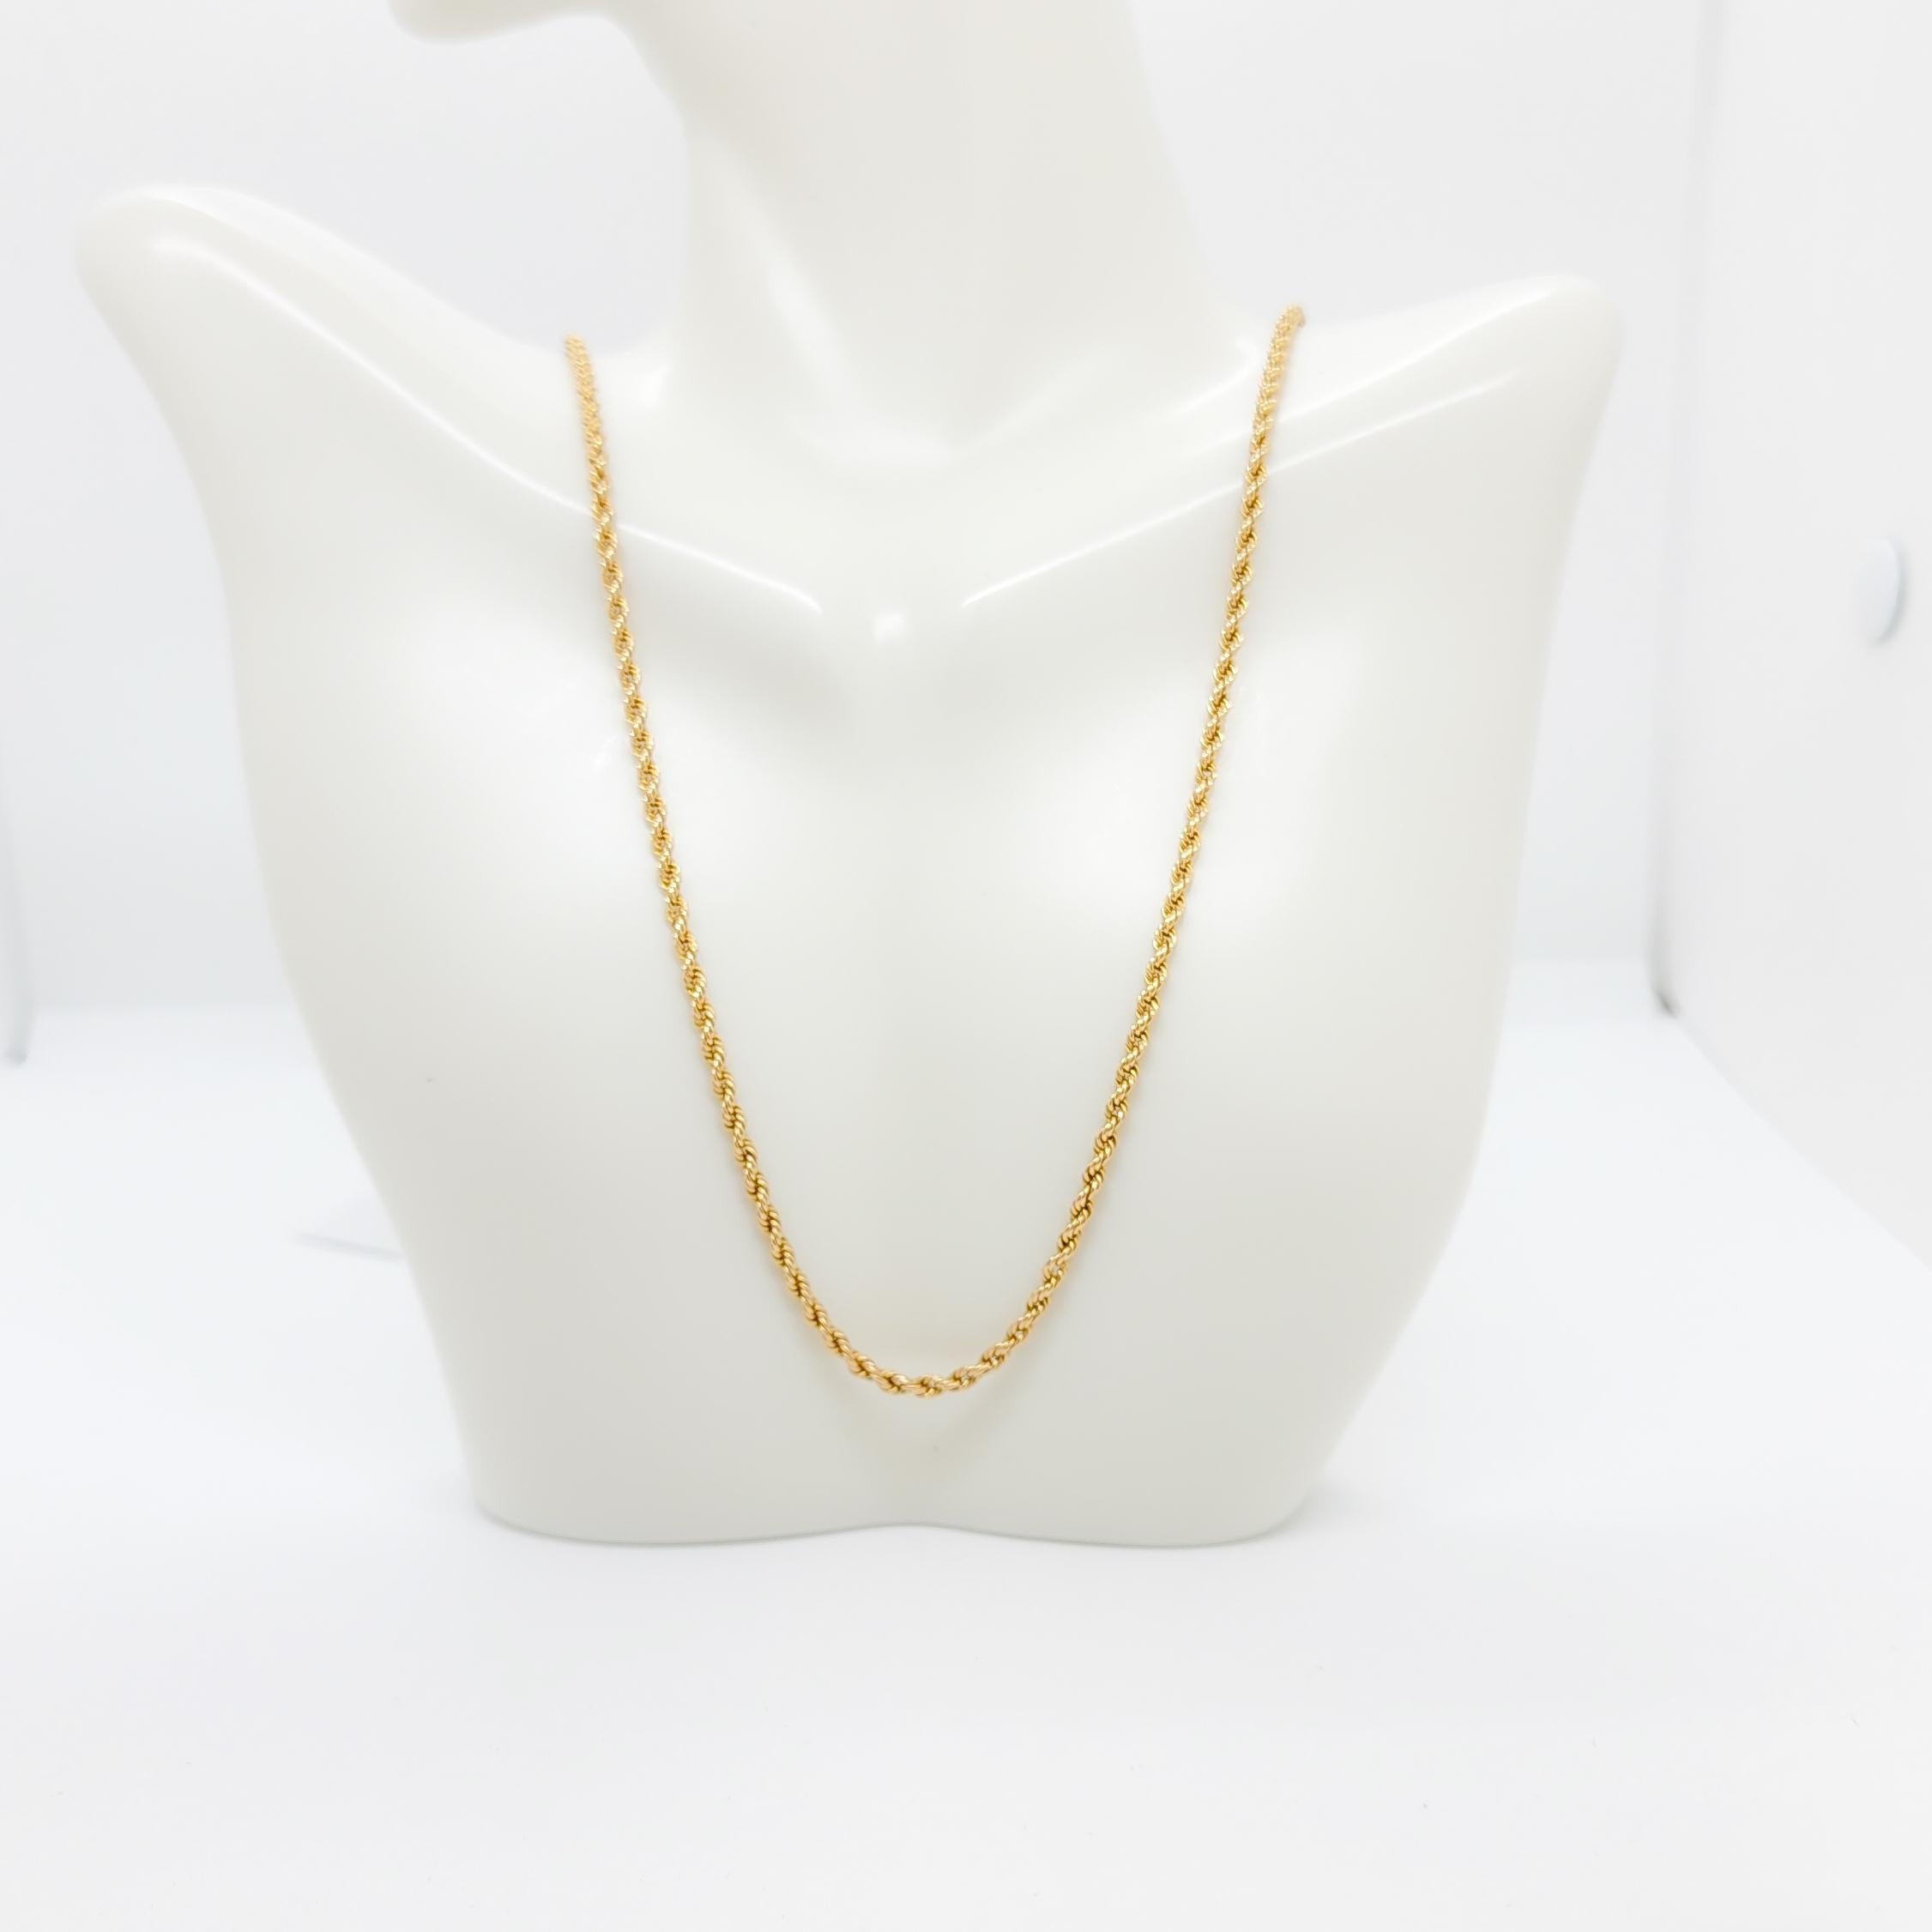 Beautiful rope chain in 18k yellow gold.  Handmade in Italy.